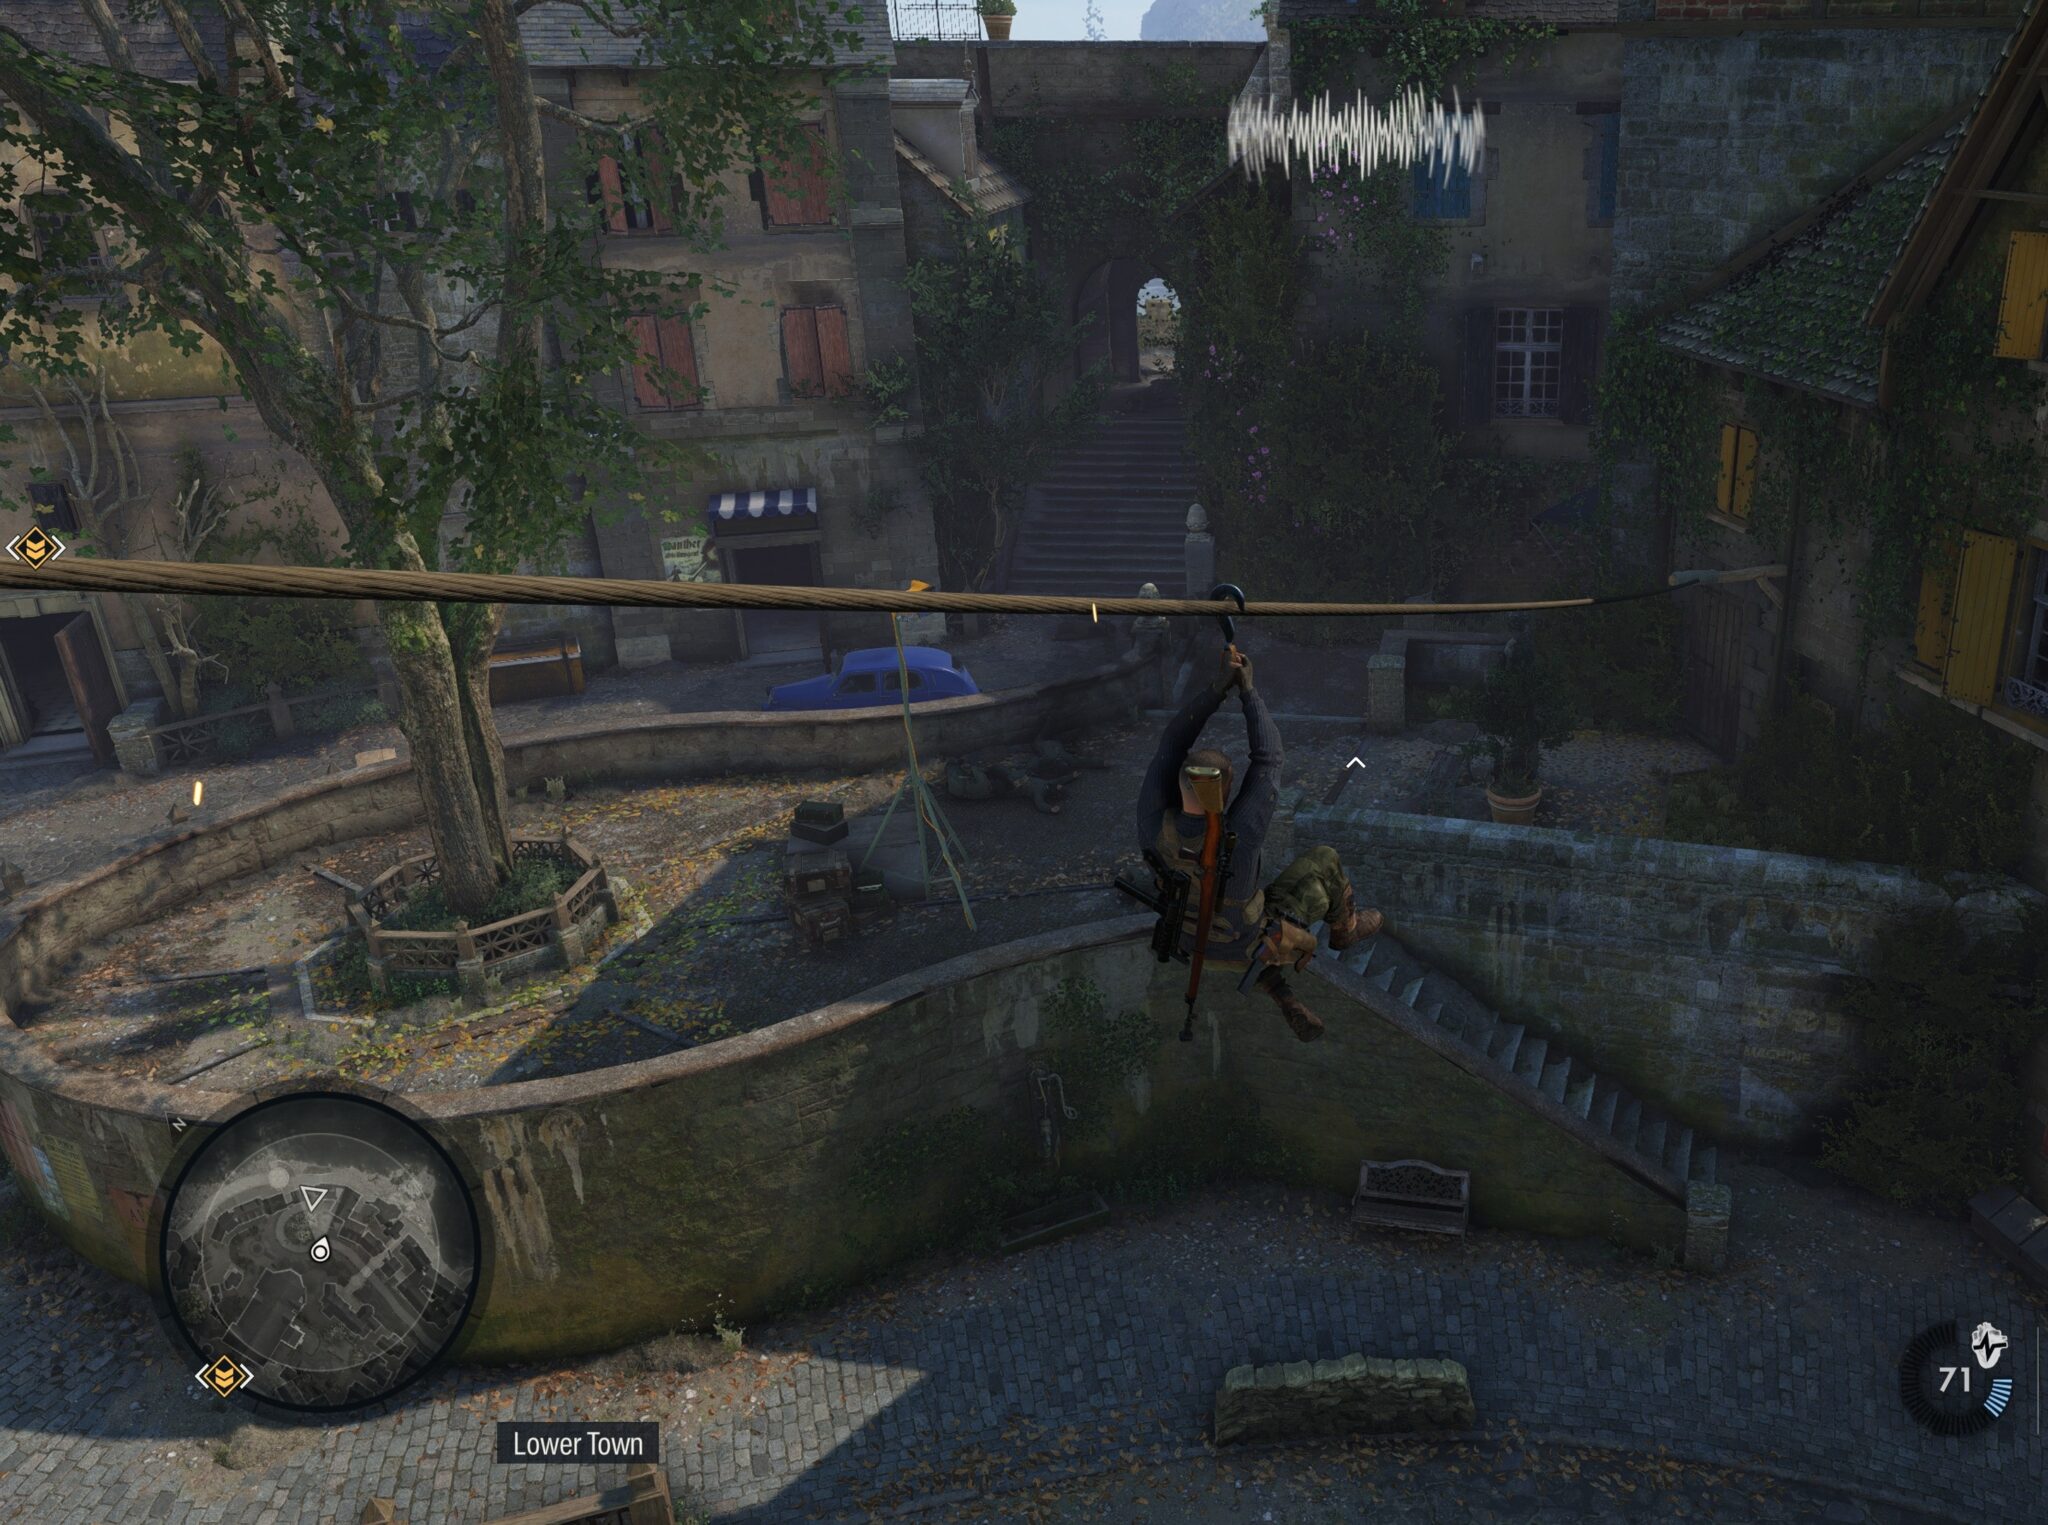 (Thanks to the new ziplines you can rappel one for the first time in Sniper Elite 5.)